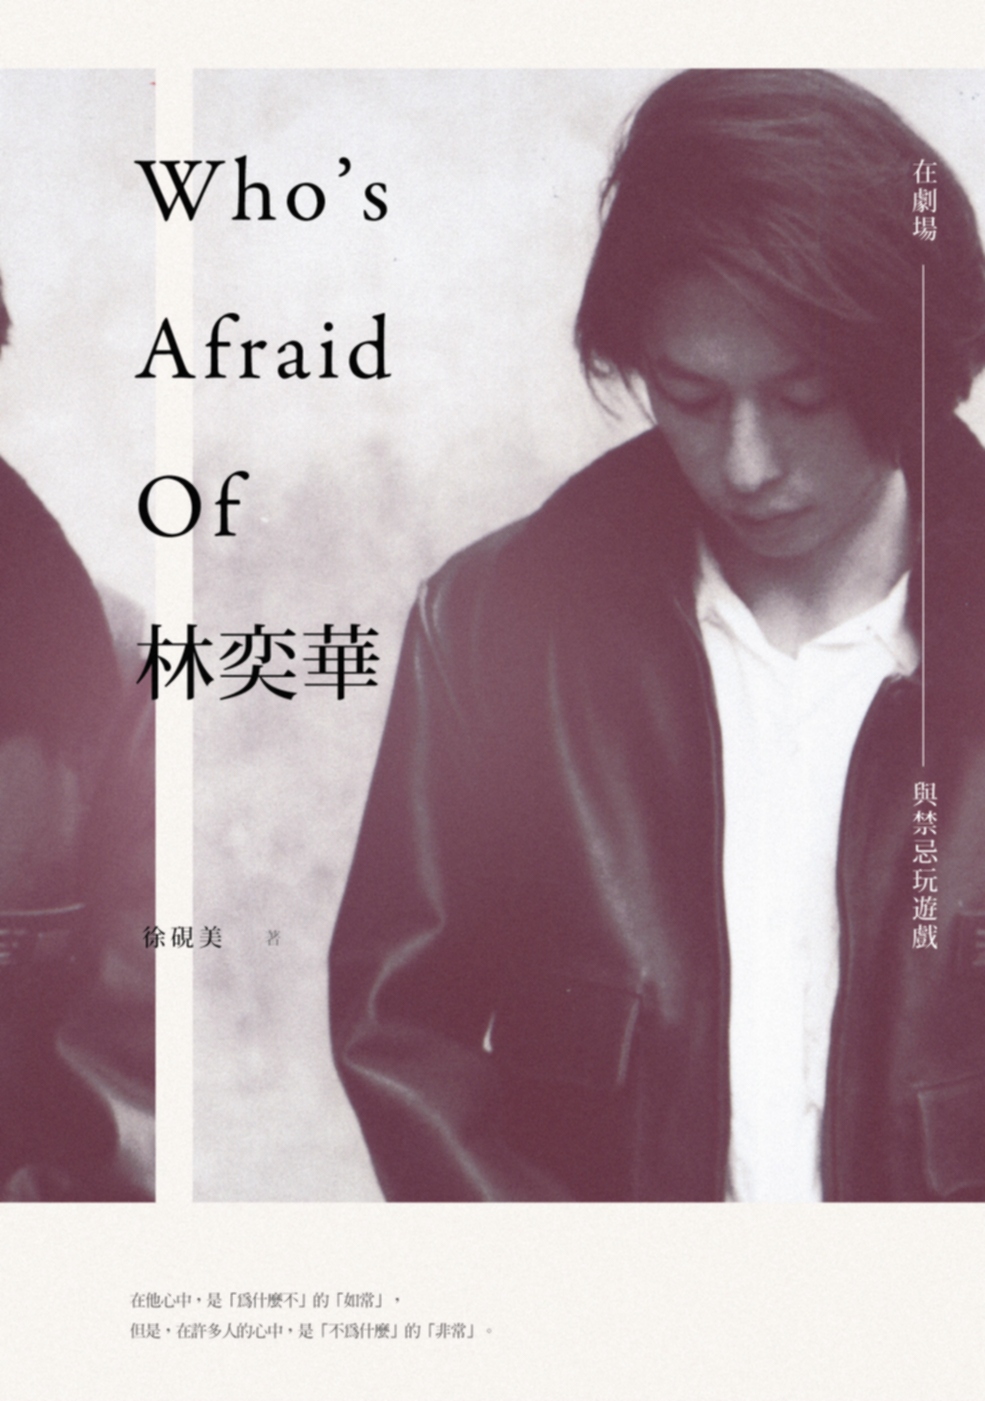 Who’s Afraid of ...